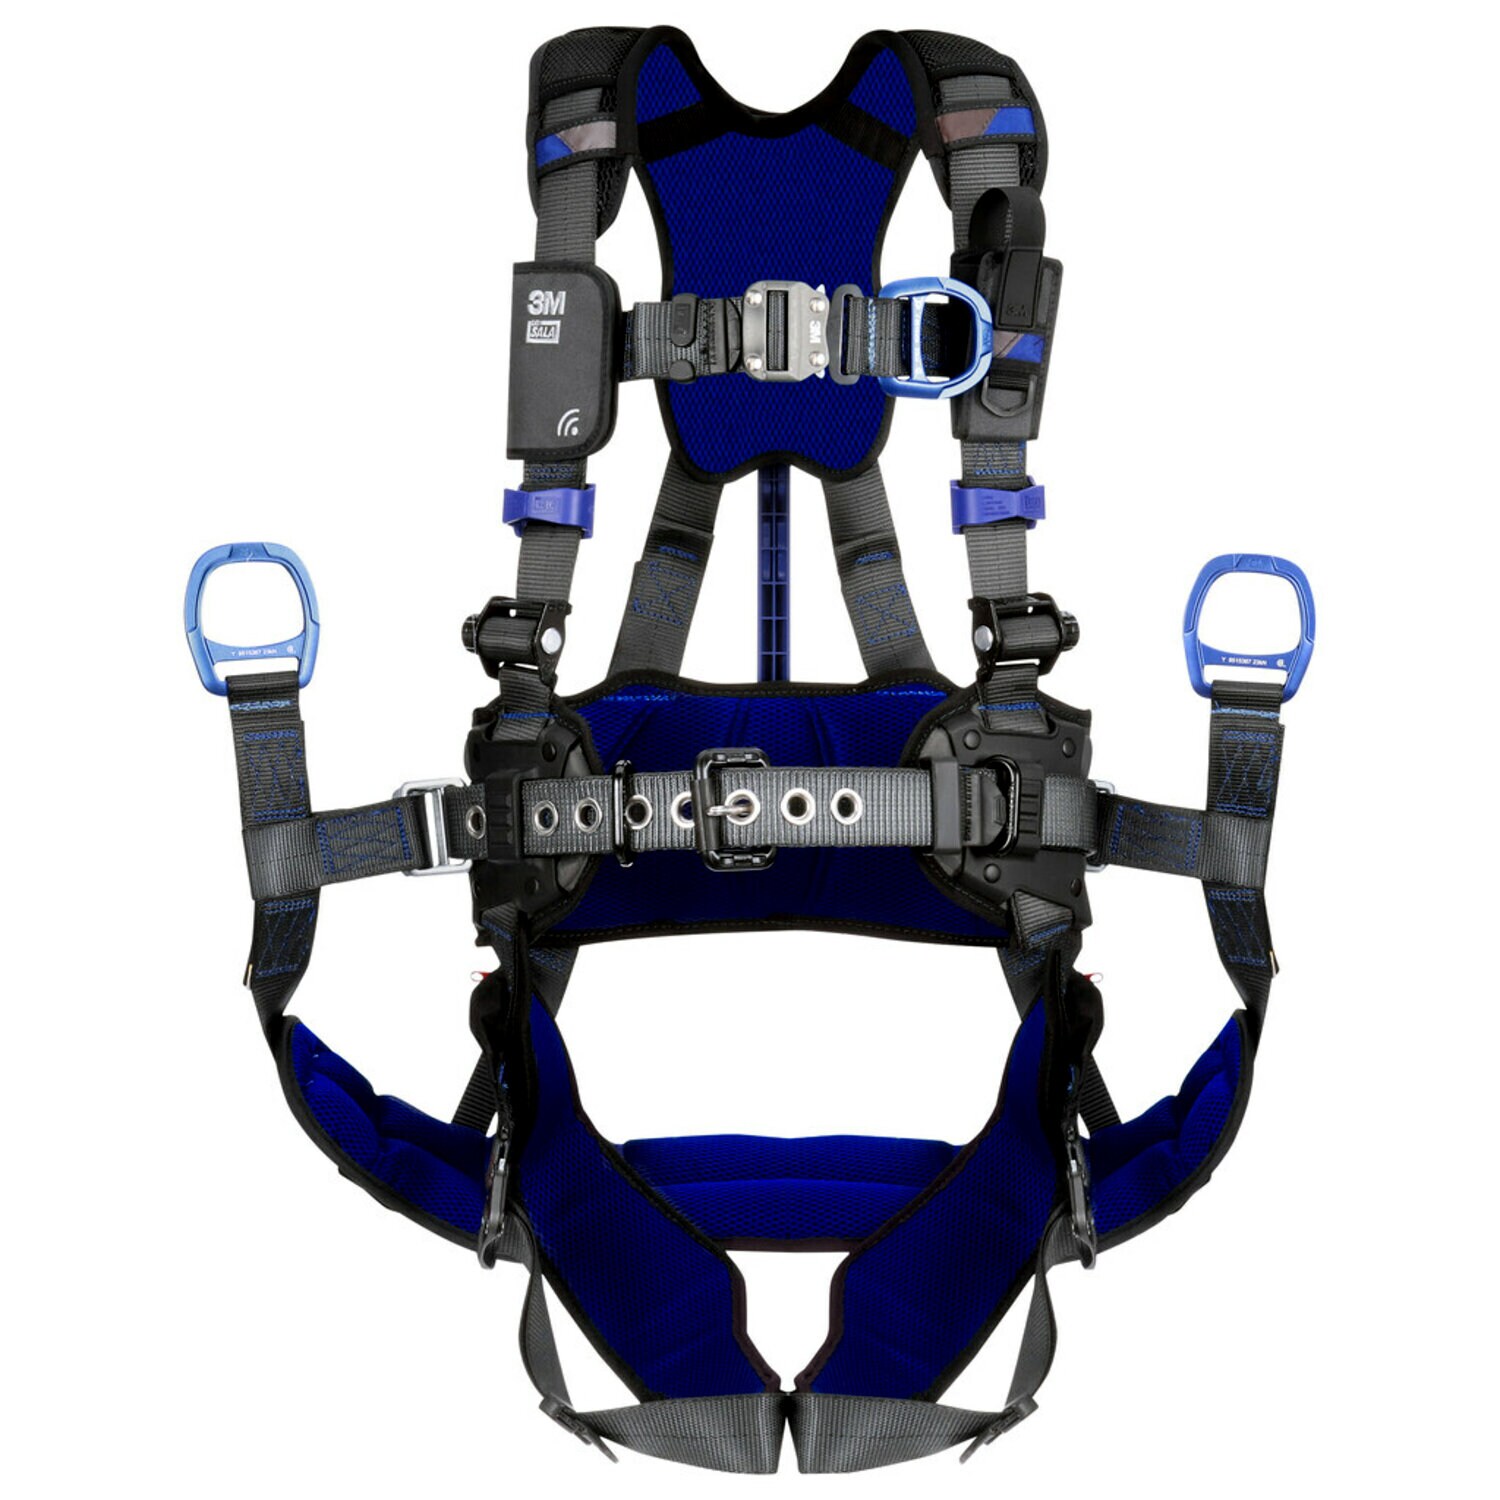 7012818058 - 3M DBI-SALA ExoFit X300 Comfort Tower Climbing/Suspension Safety Harness with Weight Bar 1403235, X-Large